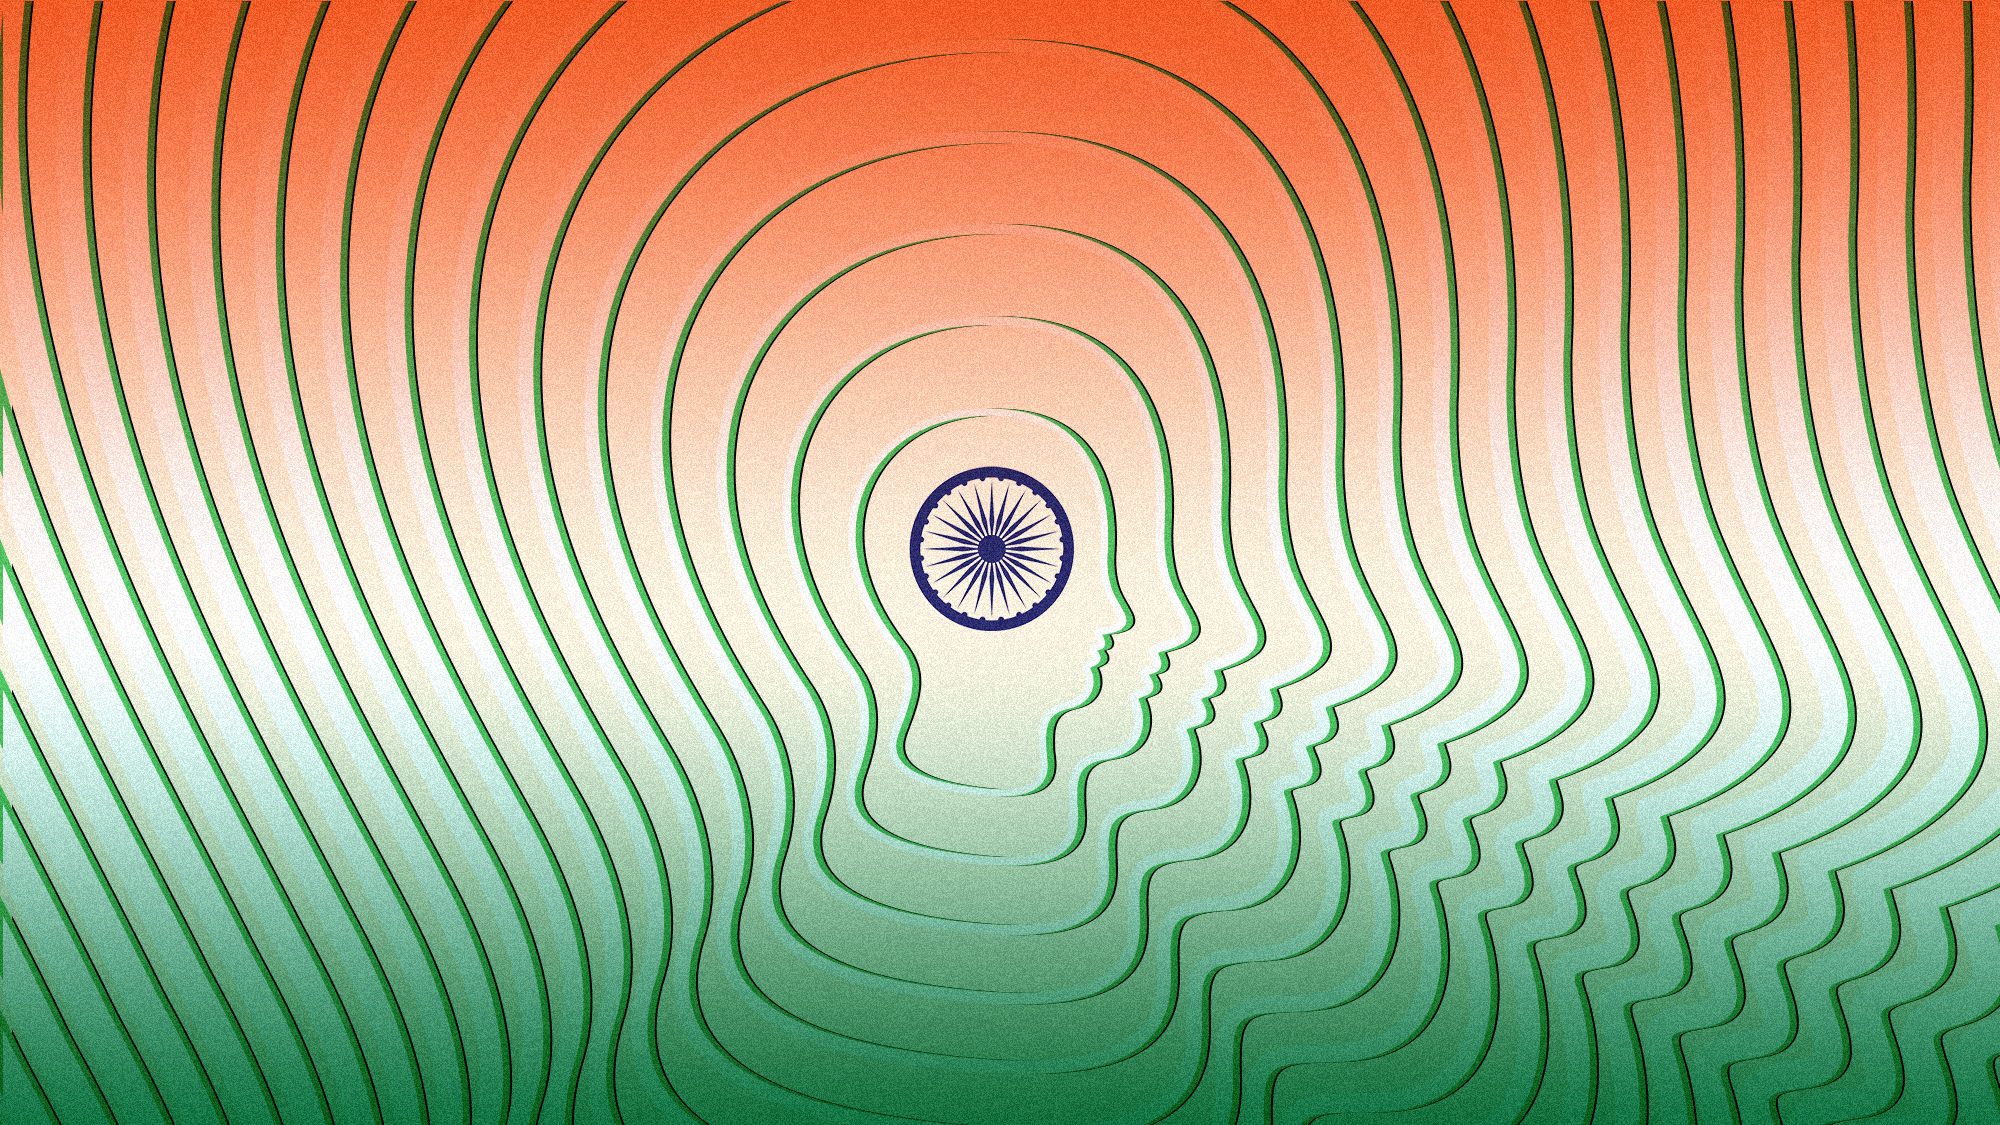 A repeating silhouette of a human face in the colors of the Indian flag